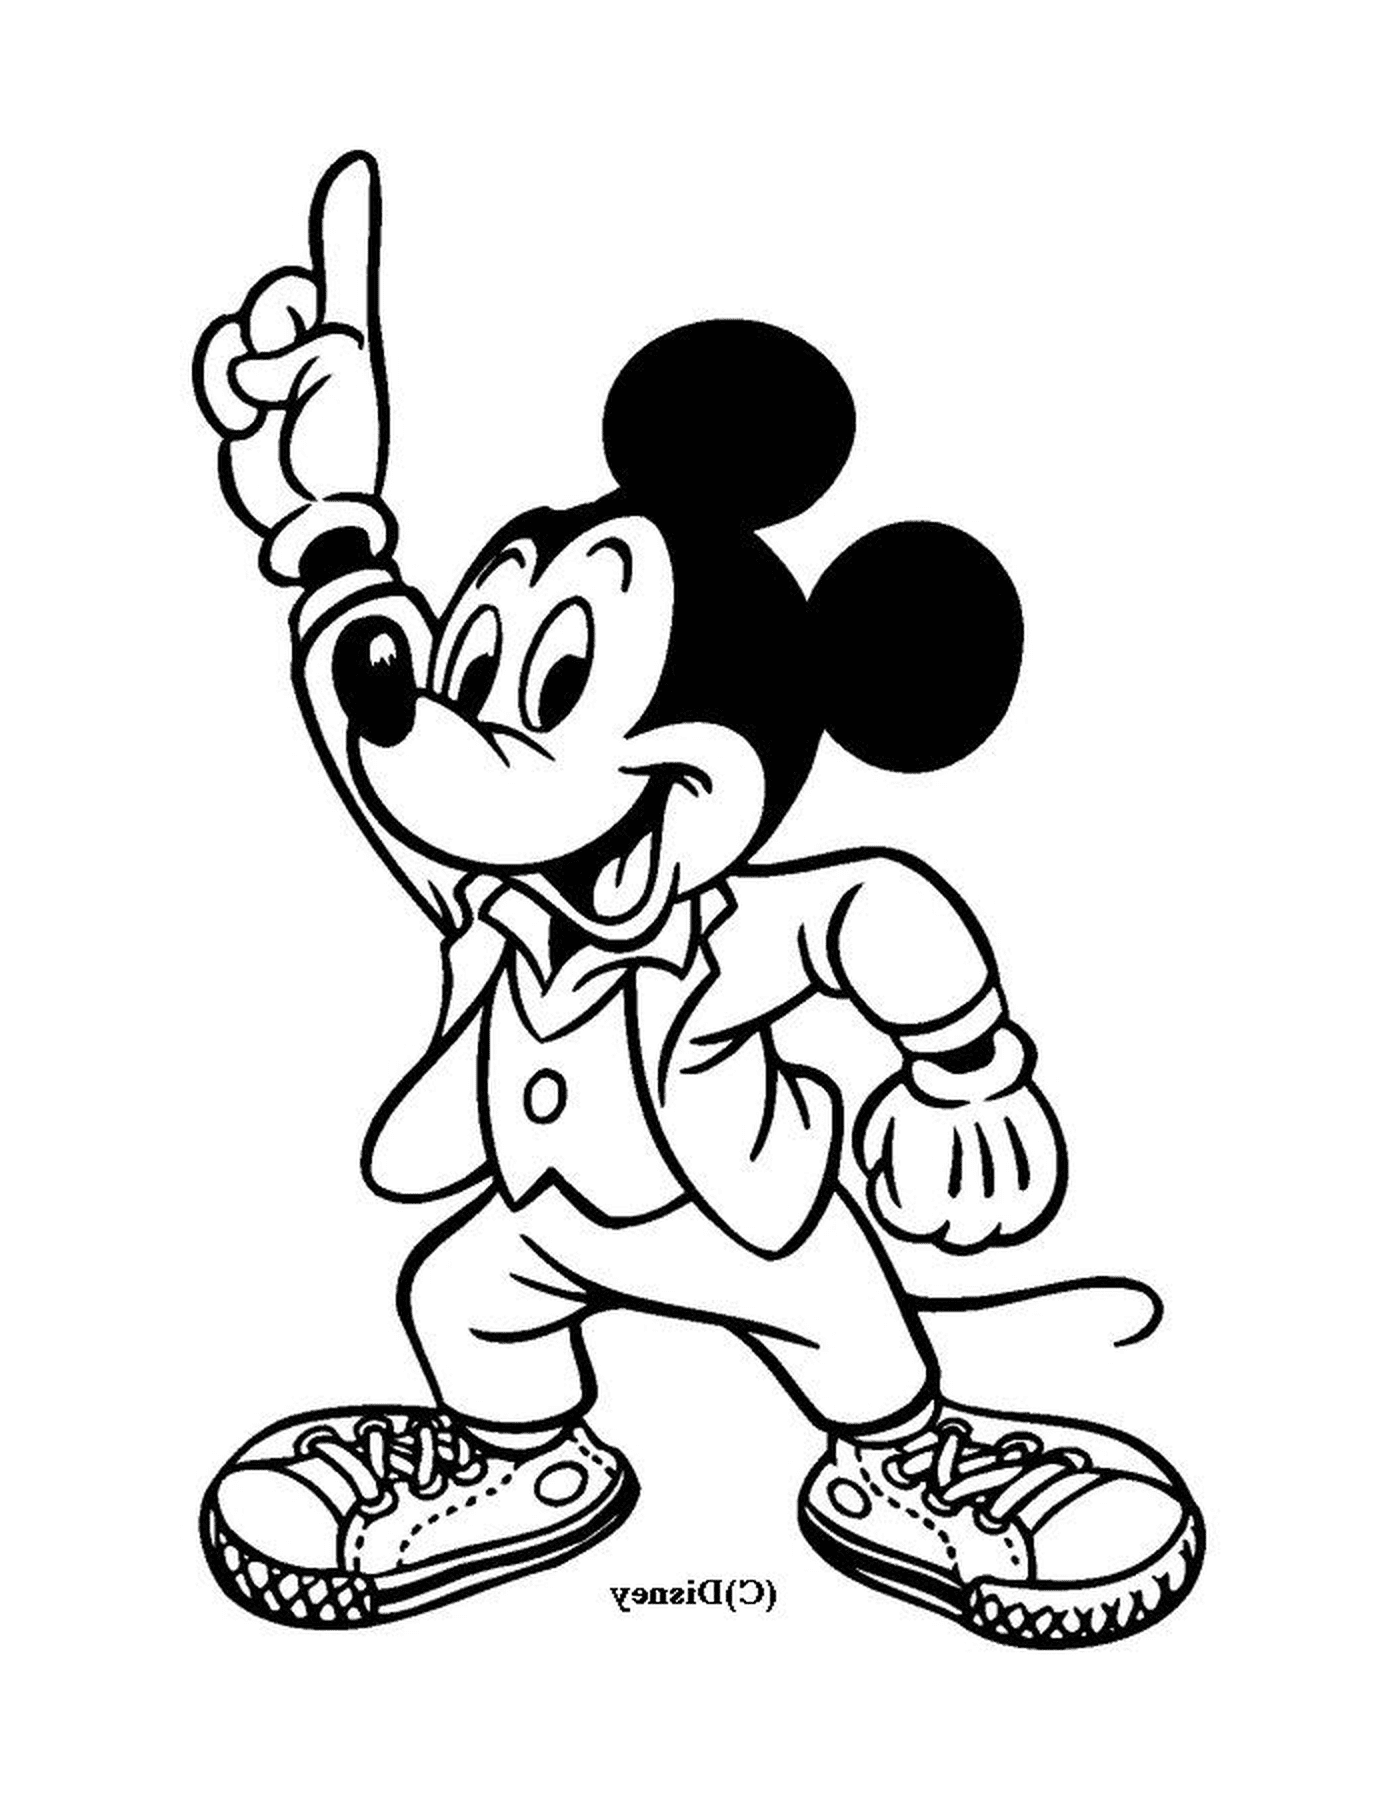  Mickey Mouse dances 